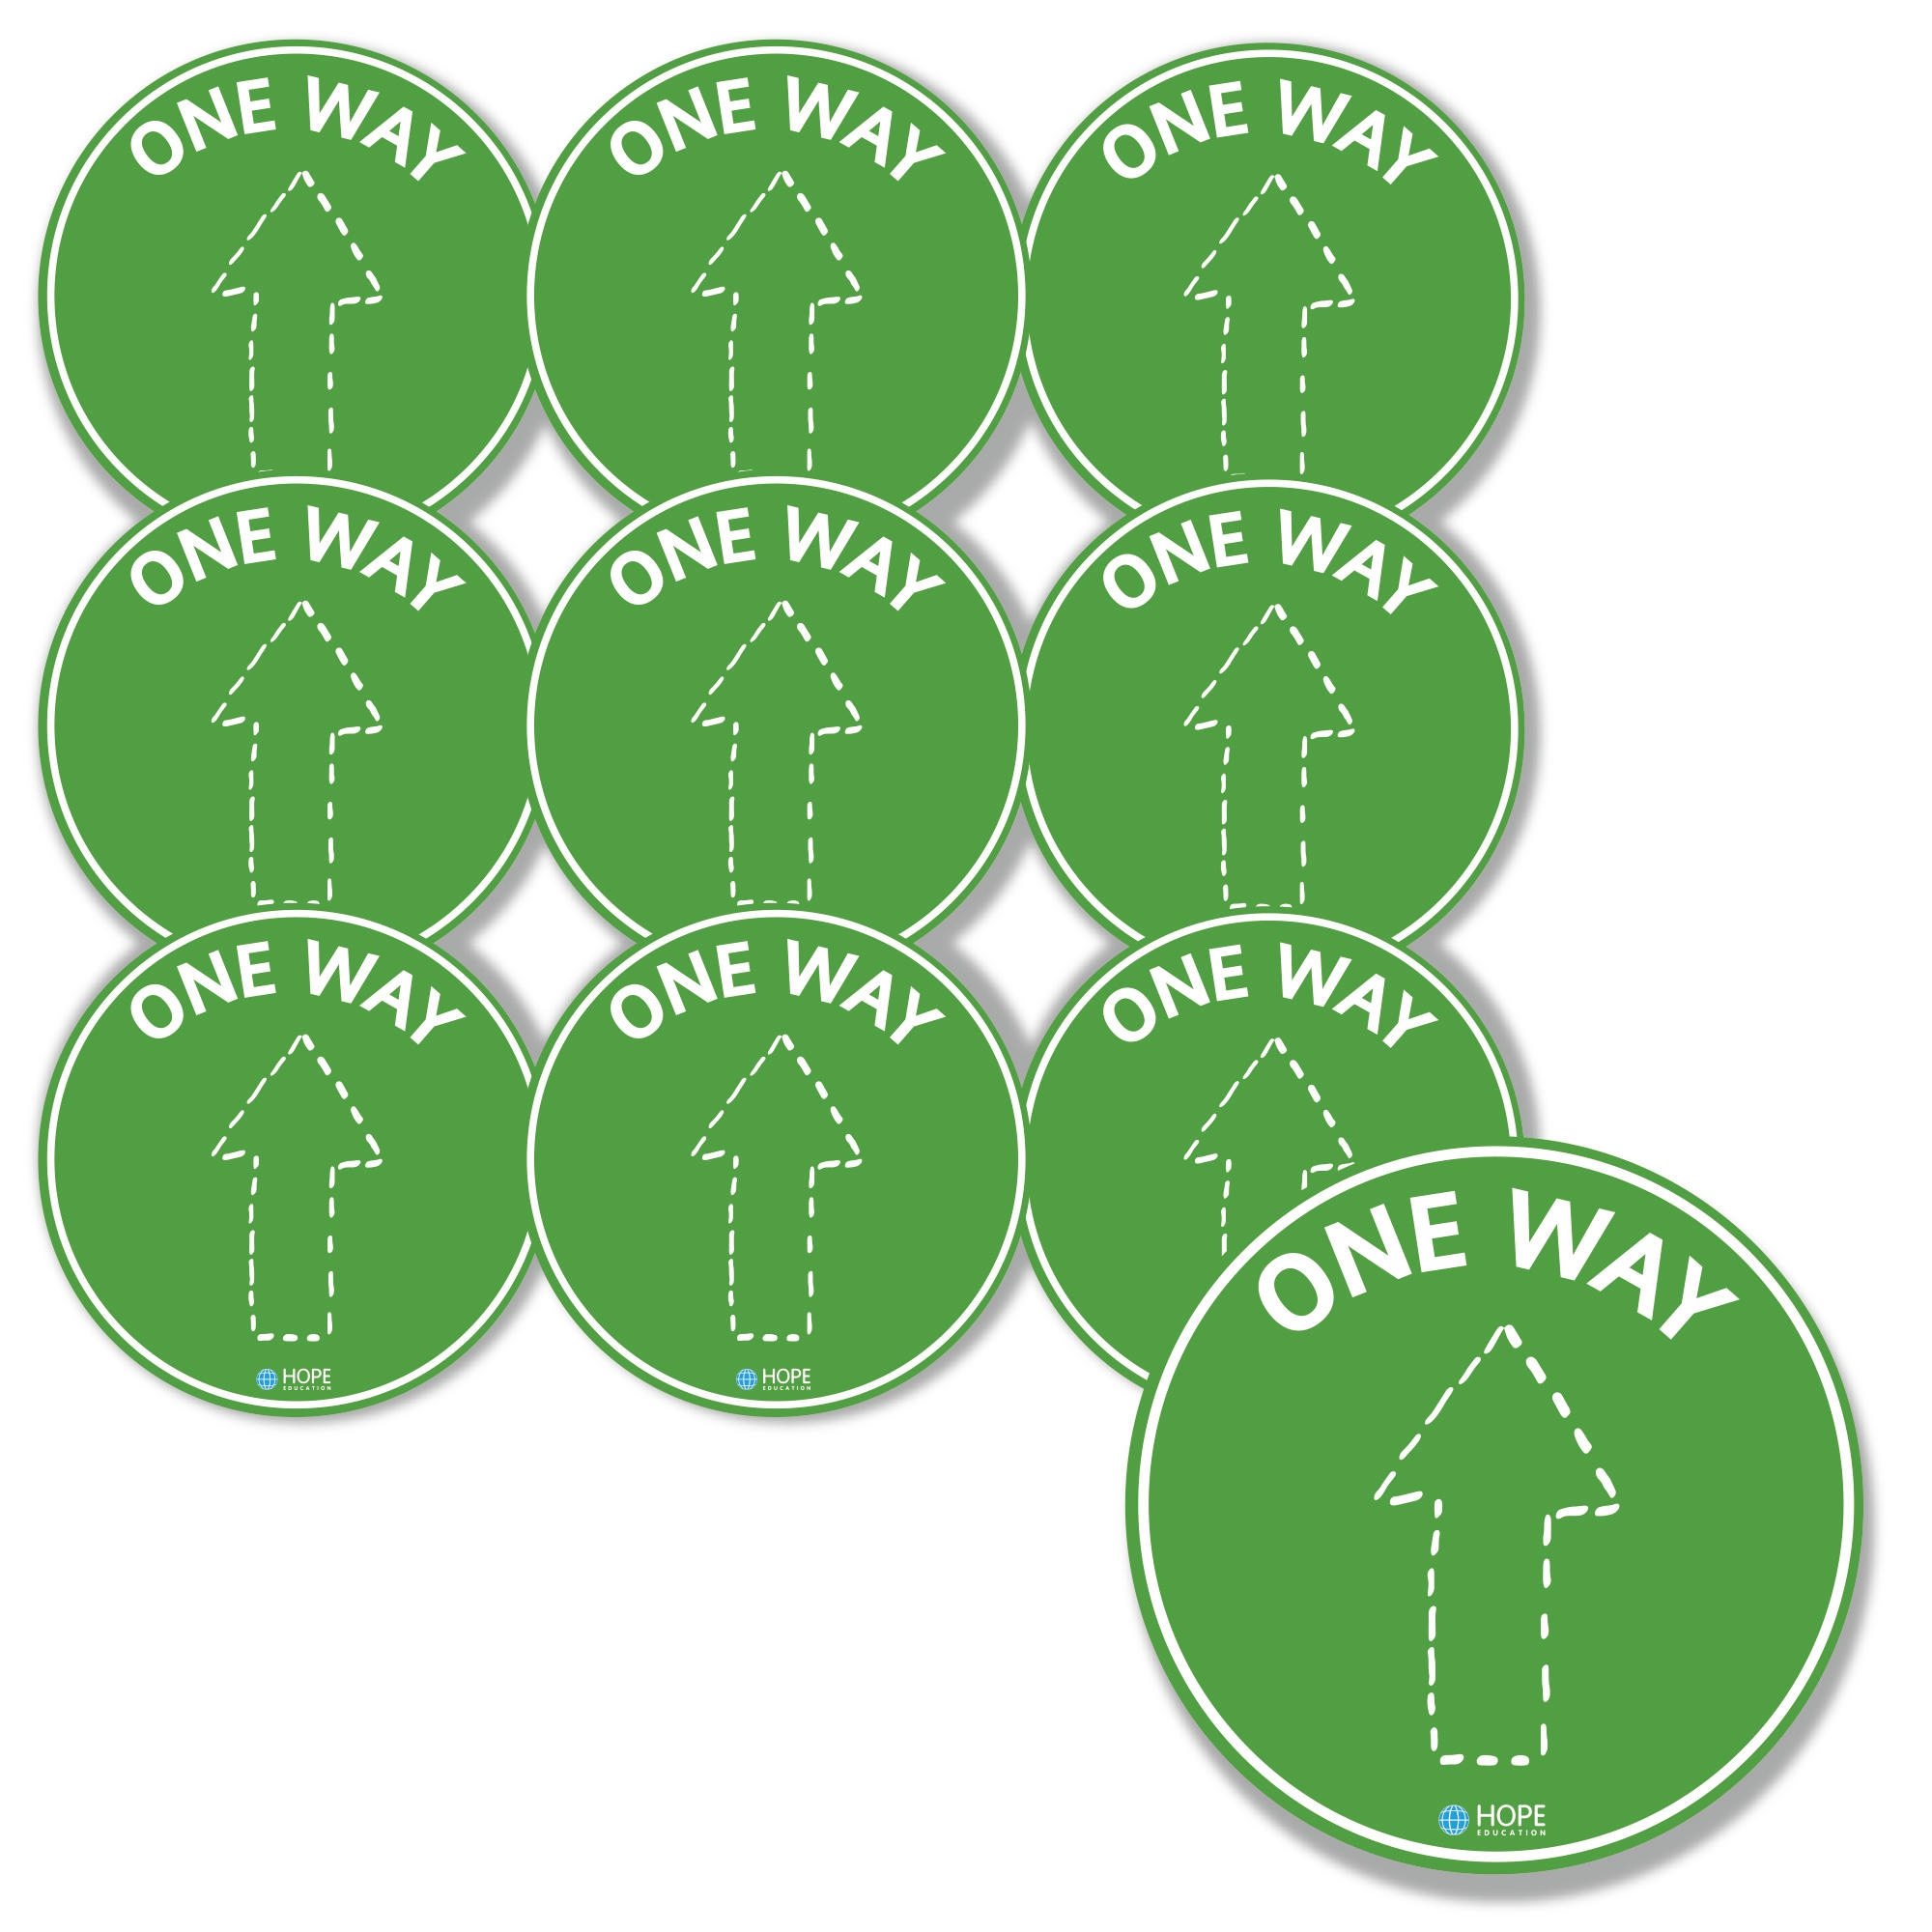 One Way Floor Stickers from Hope Education - Pack of 10 